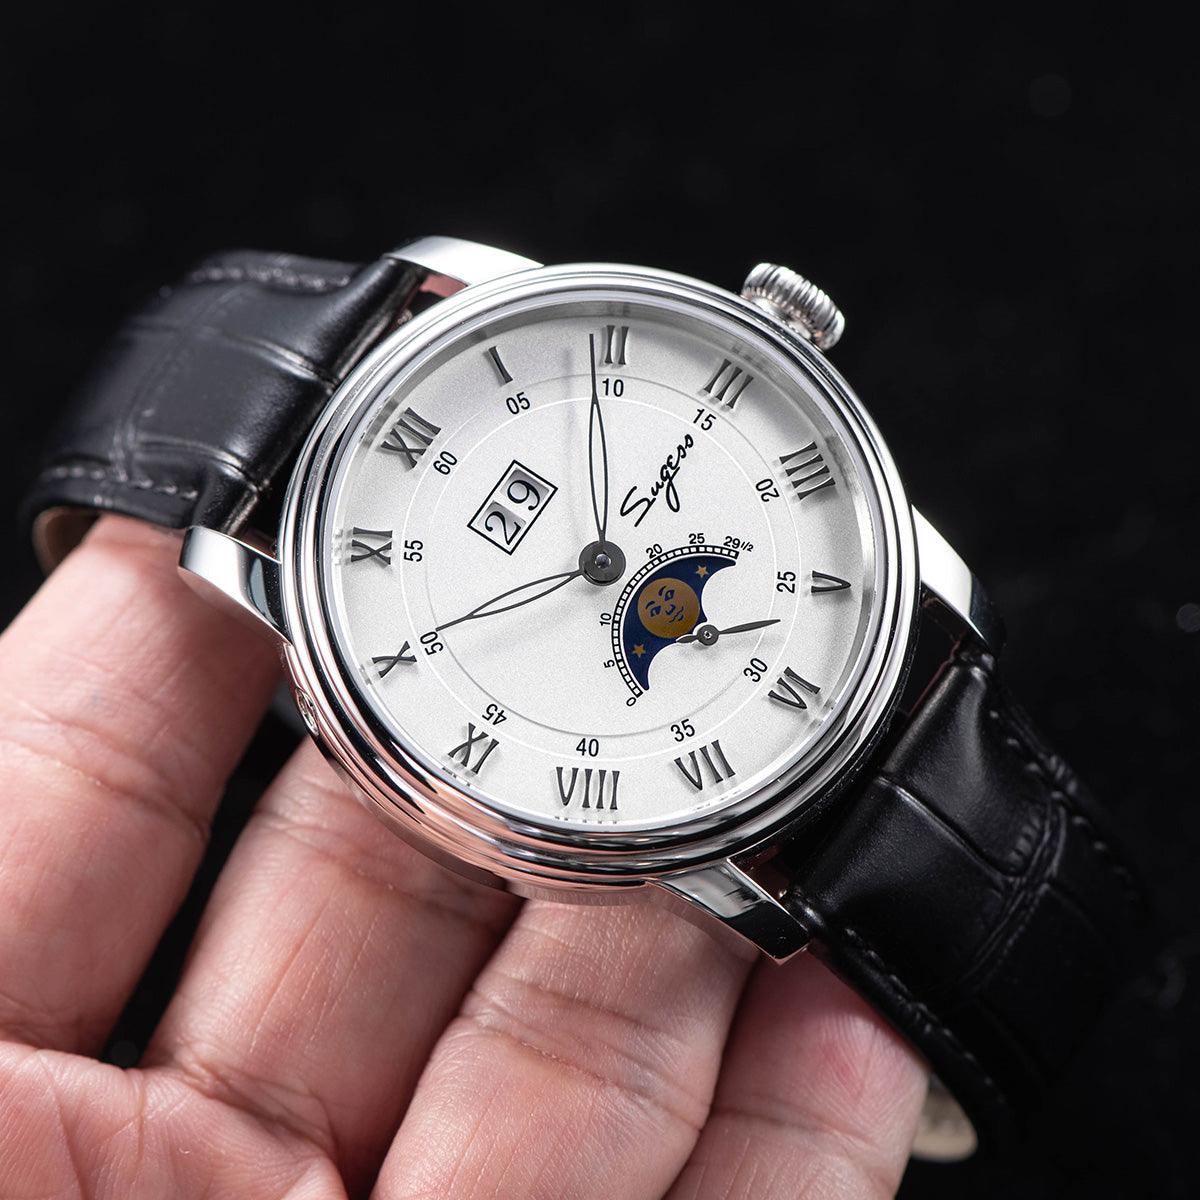 Sugess mechanical men's watch Seagull ST2528 automatic movement smiley face moon phase waterproof personalized customized automatic watch - Murphy Johnson Watches Co.